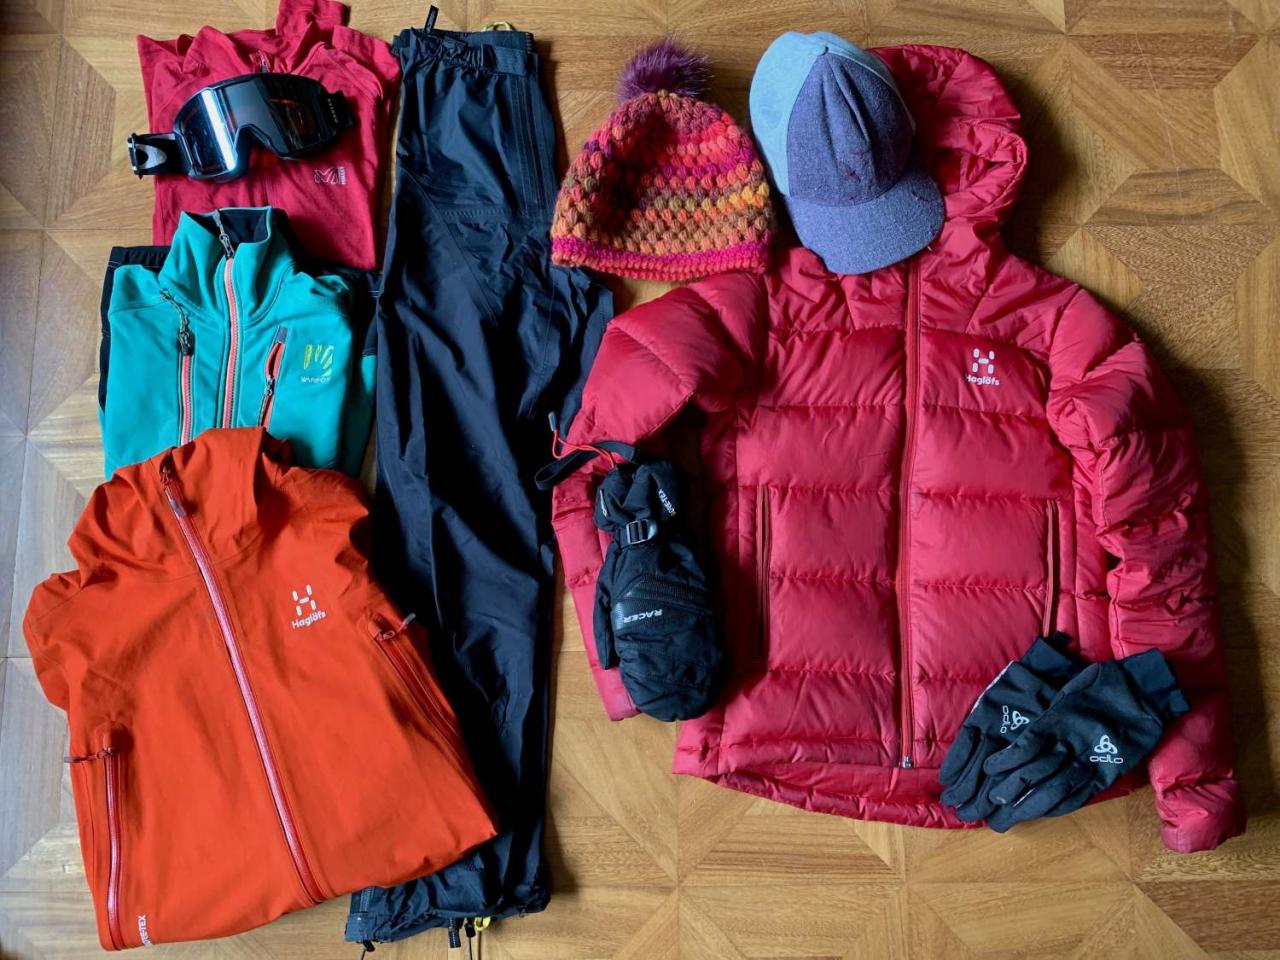 How to dress for ski touring?